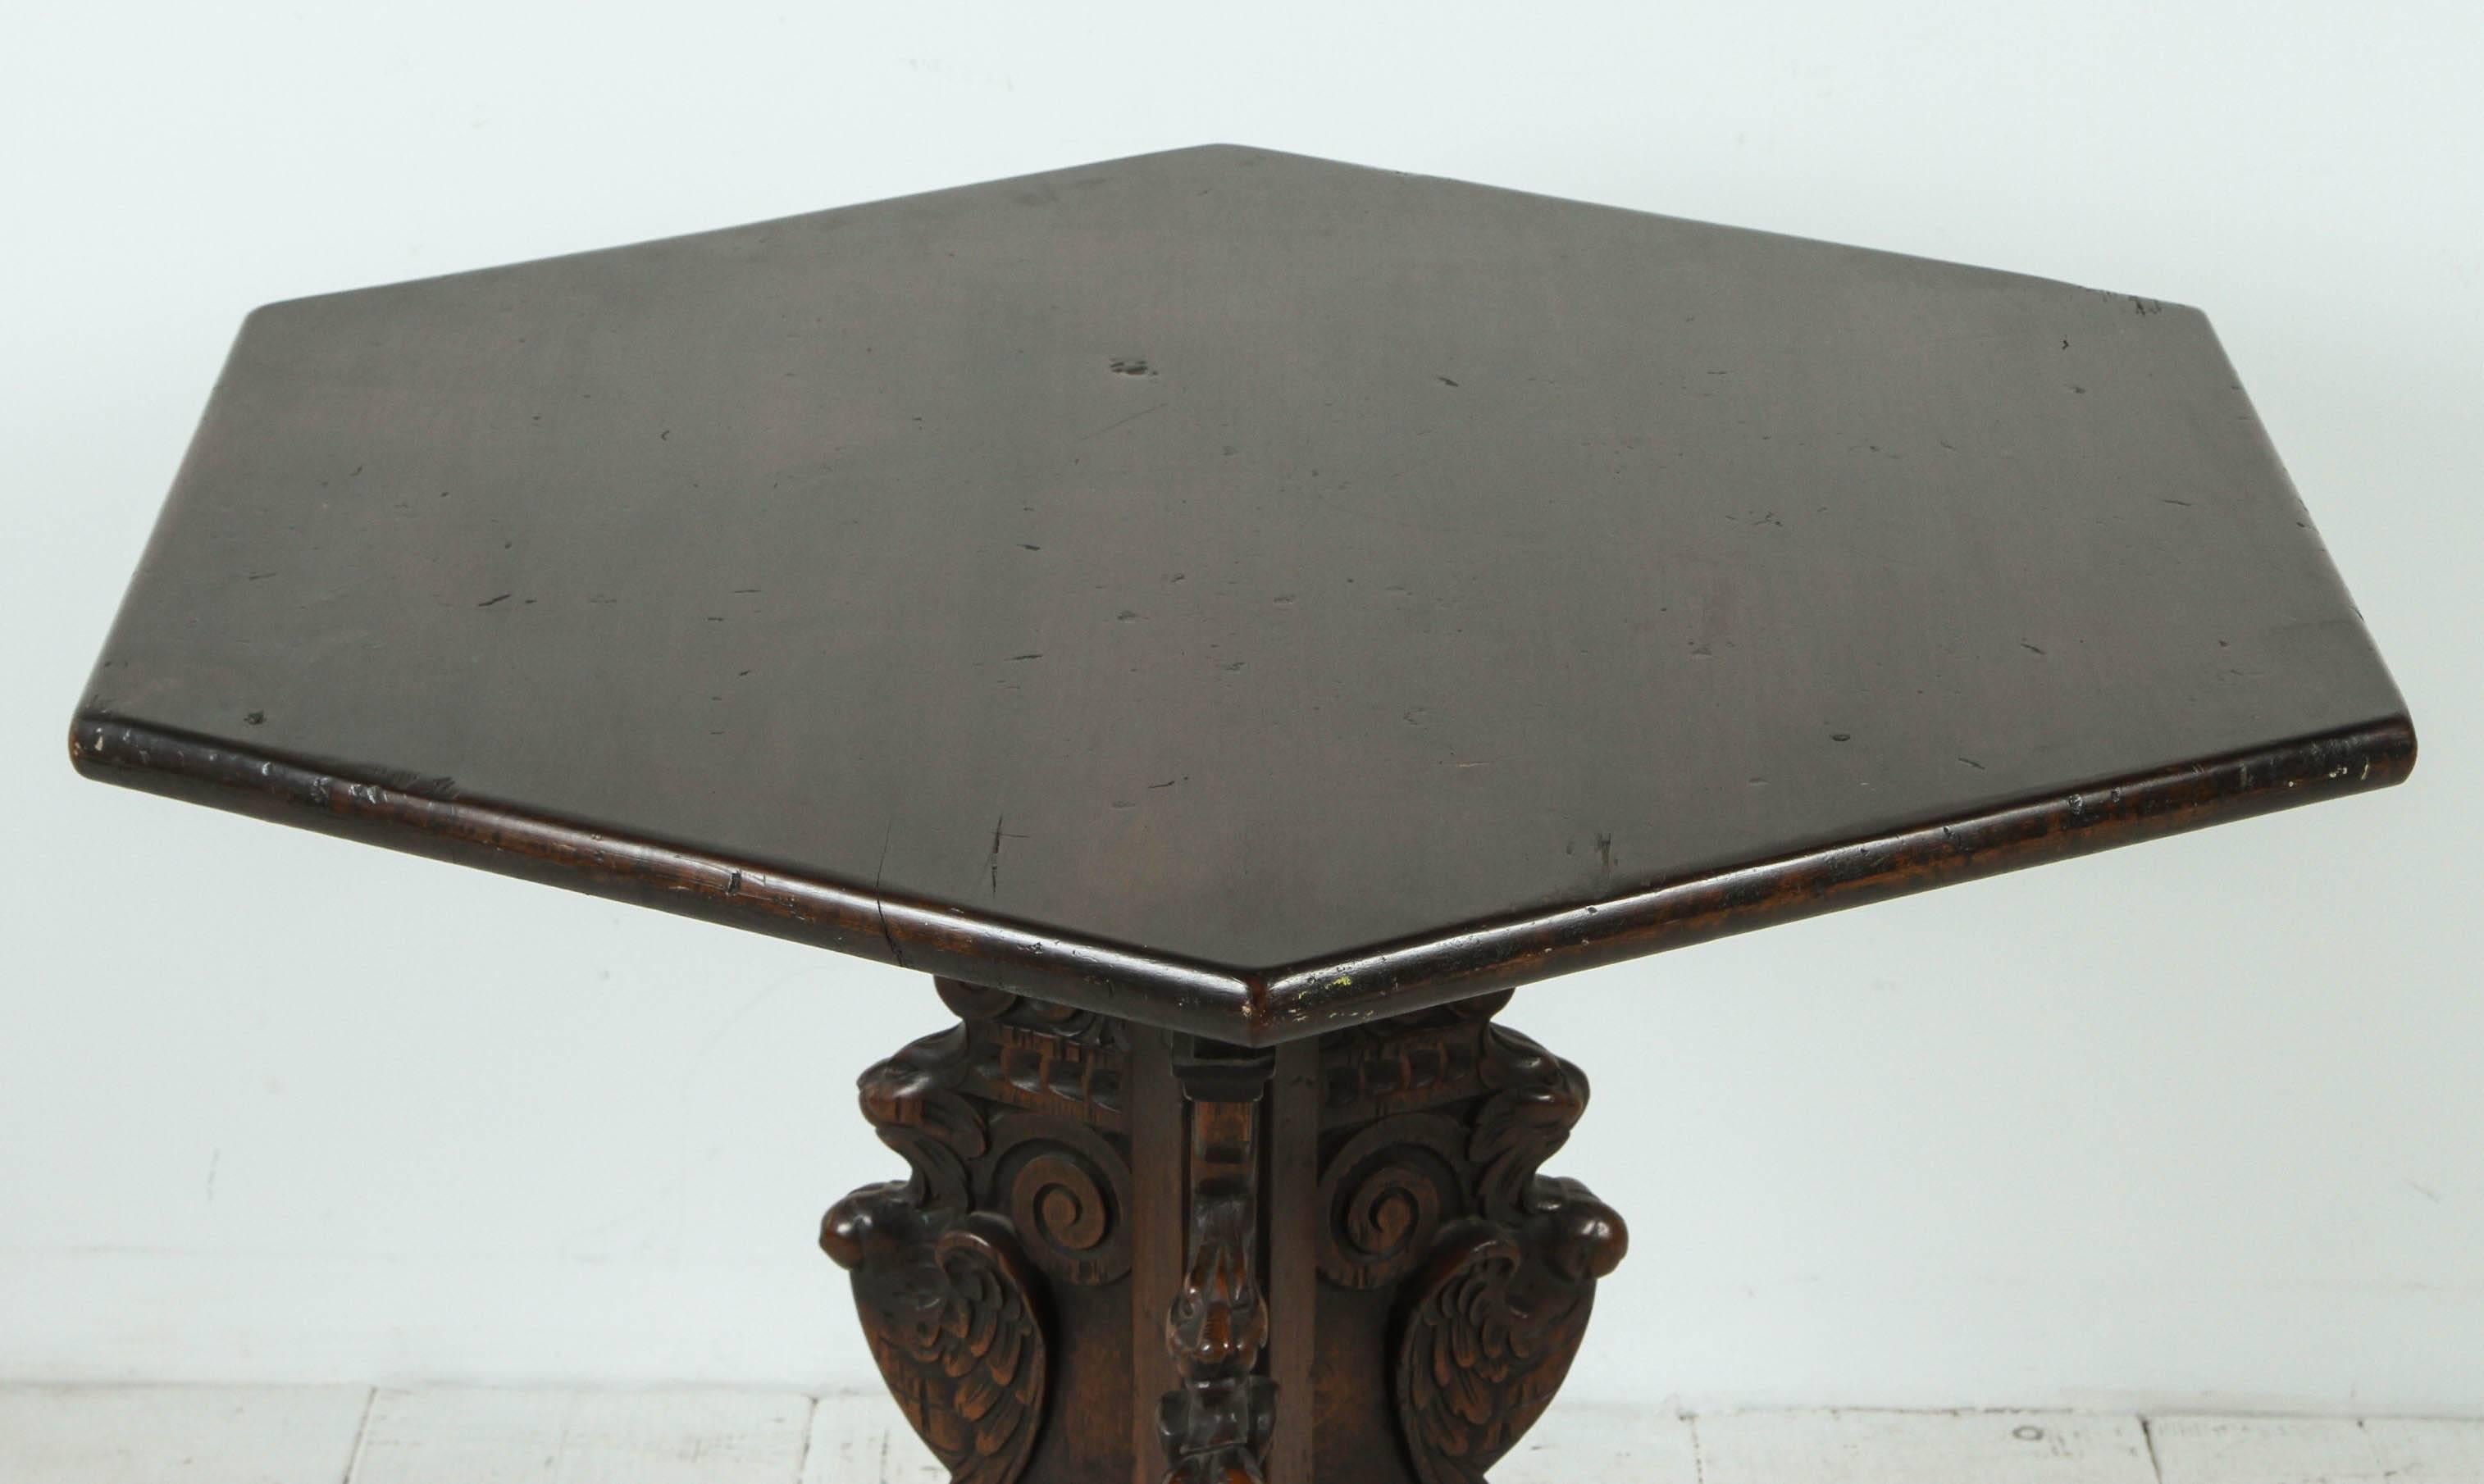 20th Century Spanish Pedestal Hexagonal Table with Ornate Details